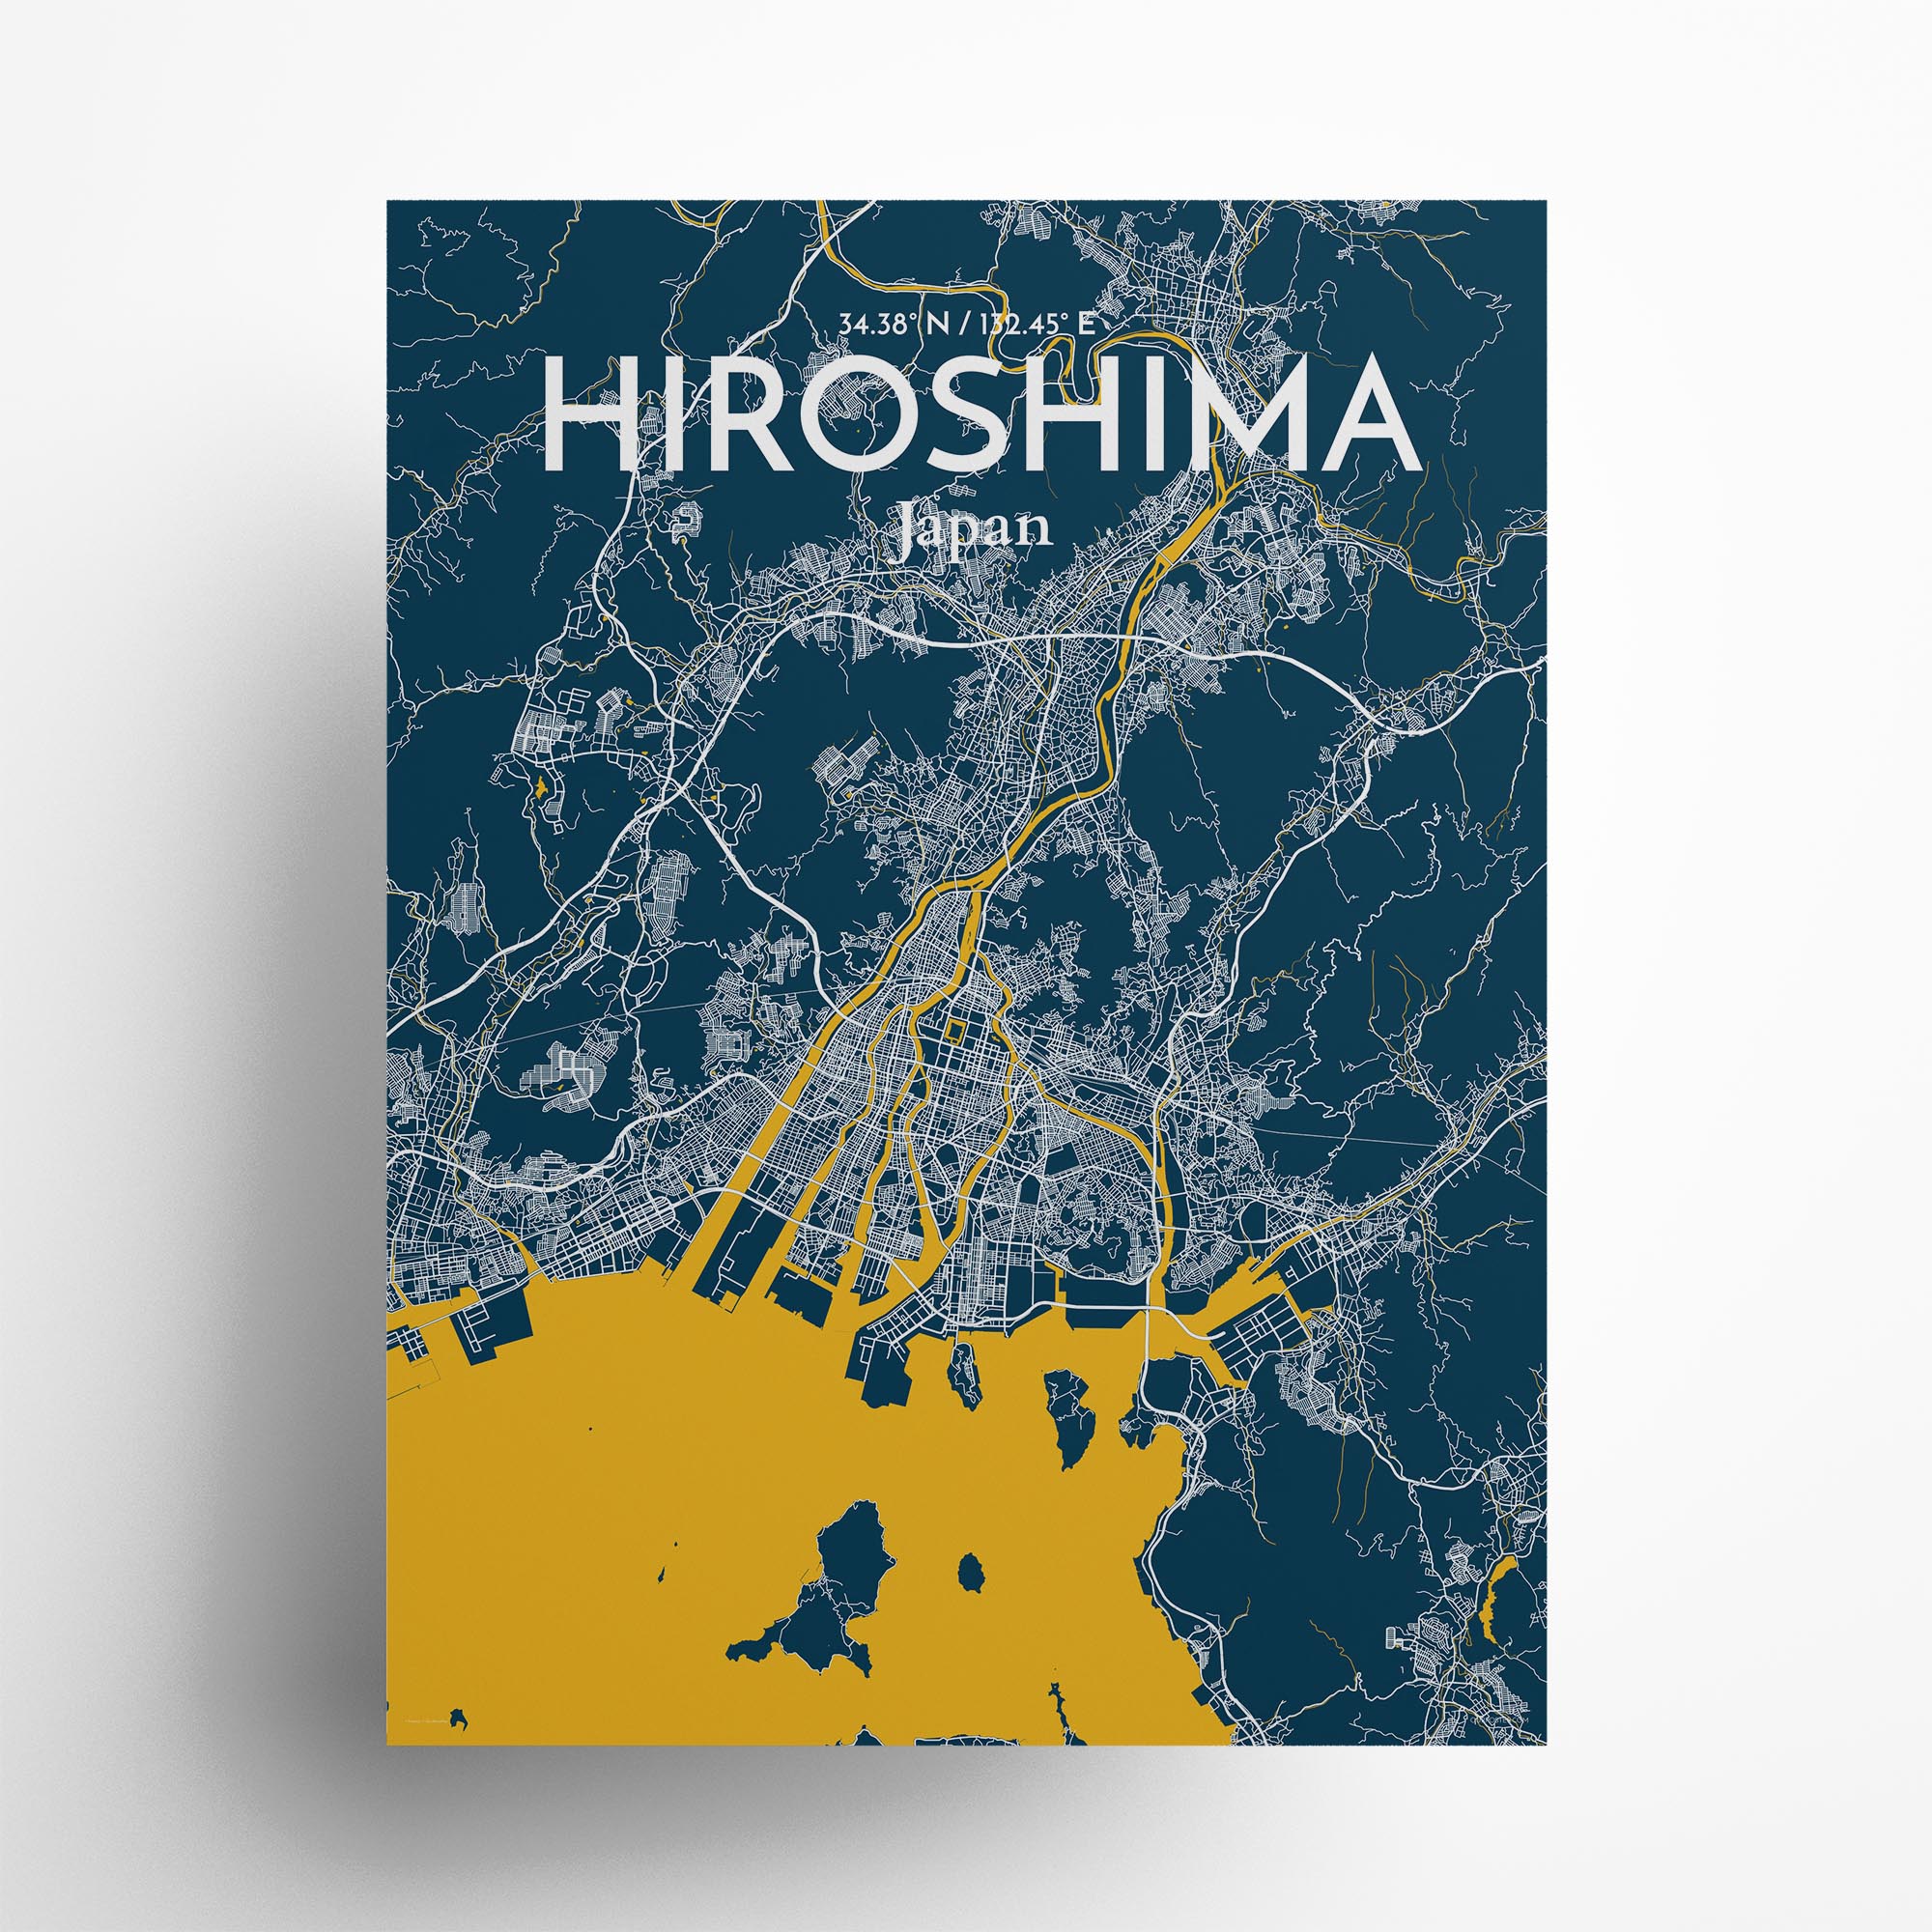 Hiroshima city map poster in Amuse of size 18" x 24"